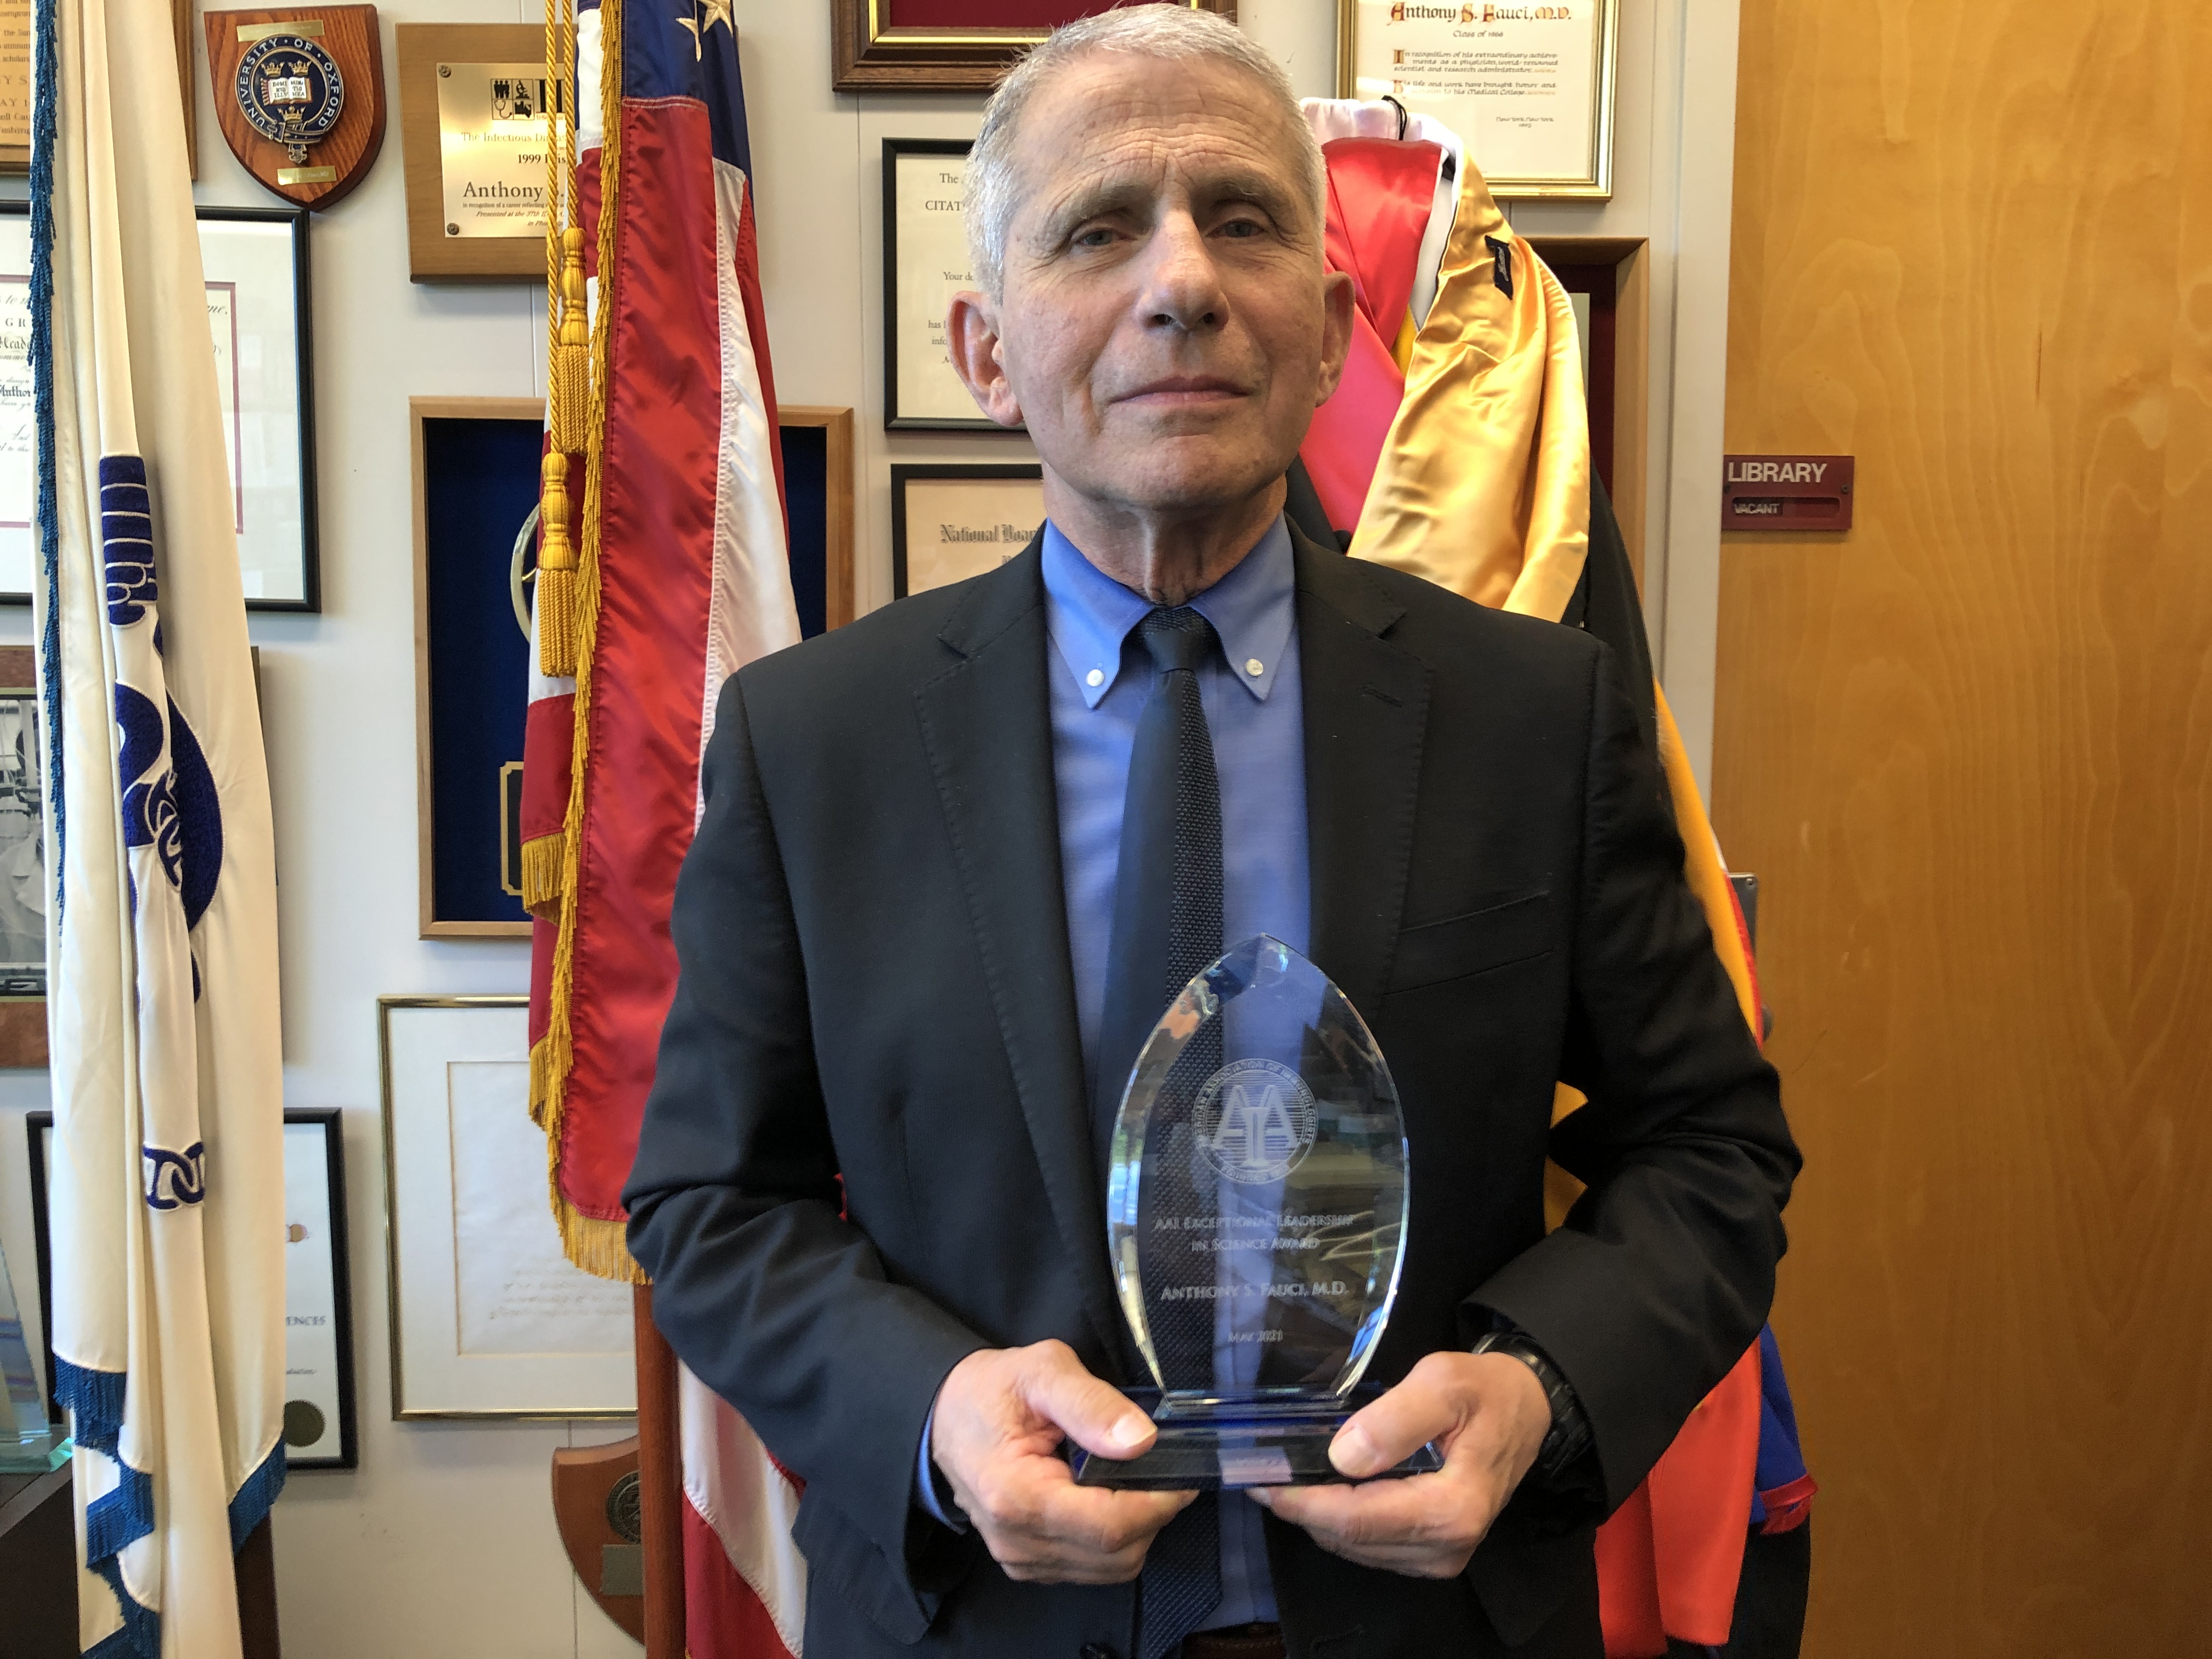 Anthony S. Fauci with the Exceptional Leadership in Science Award